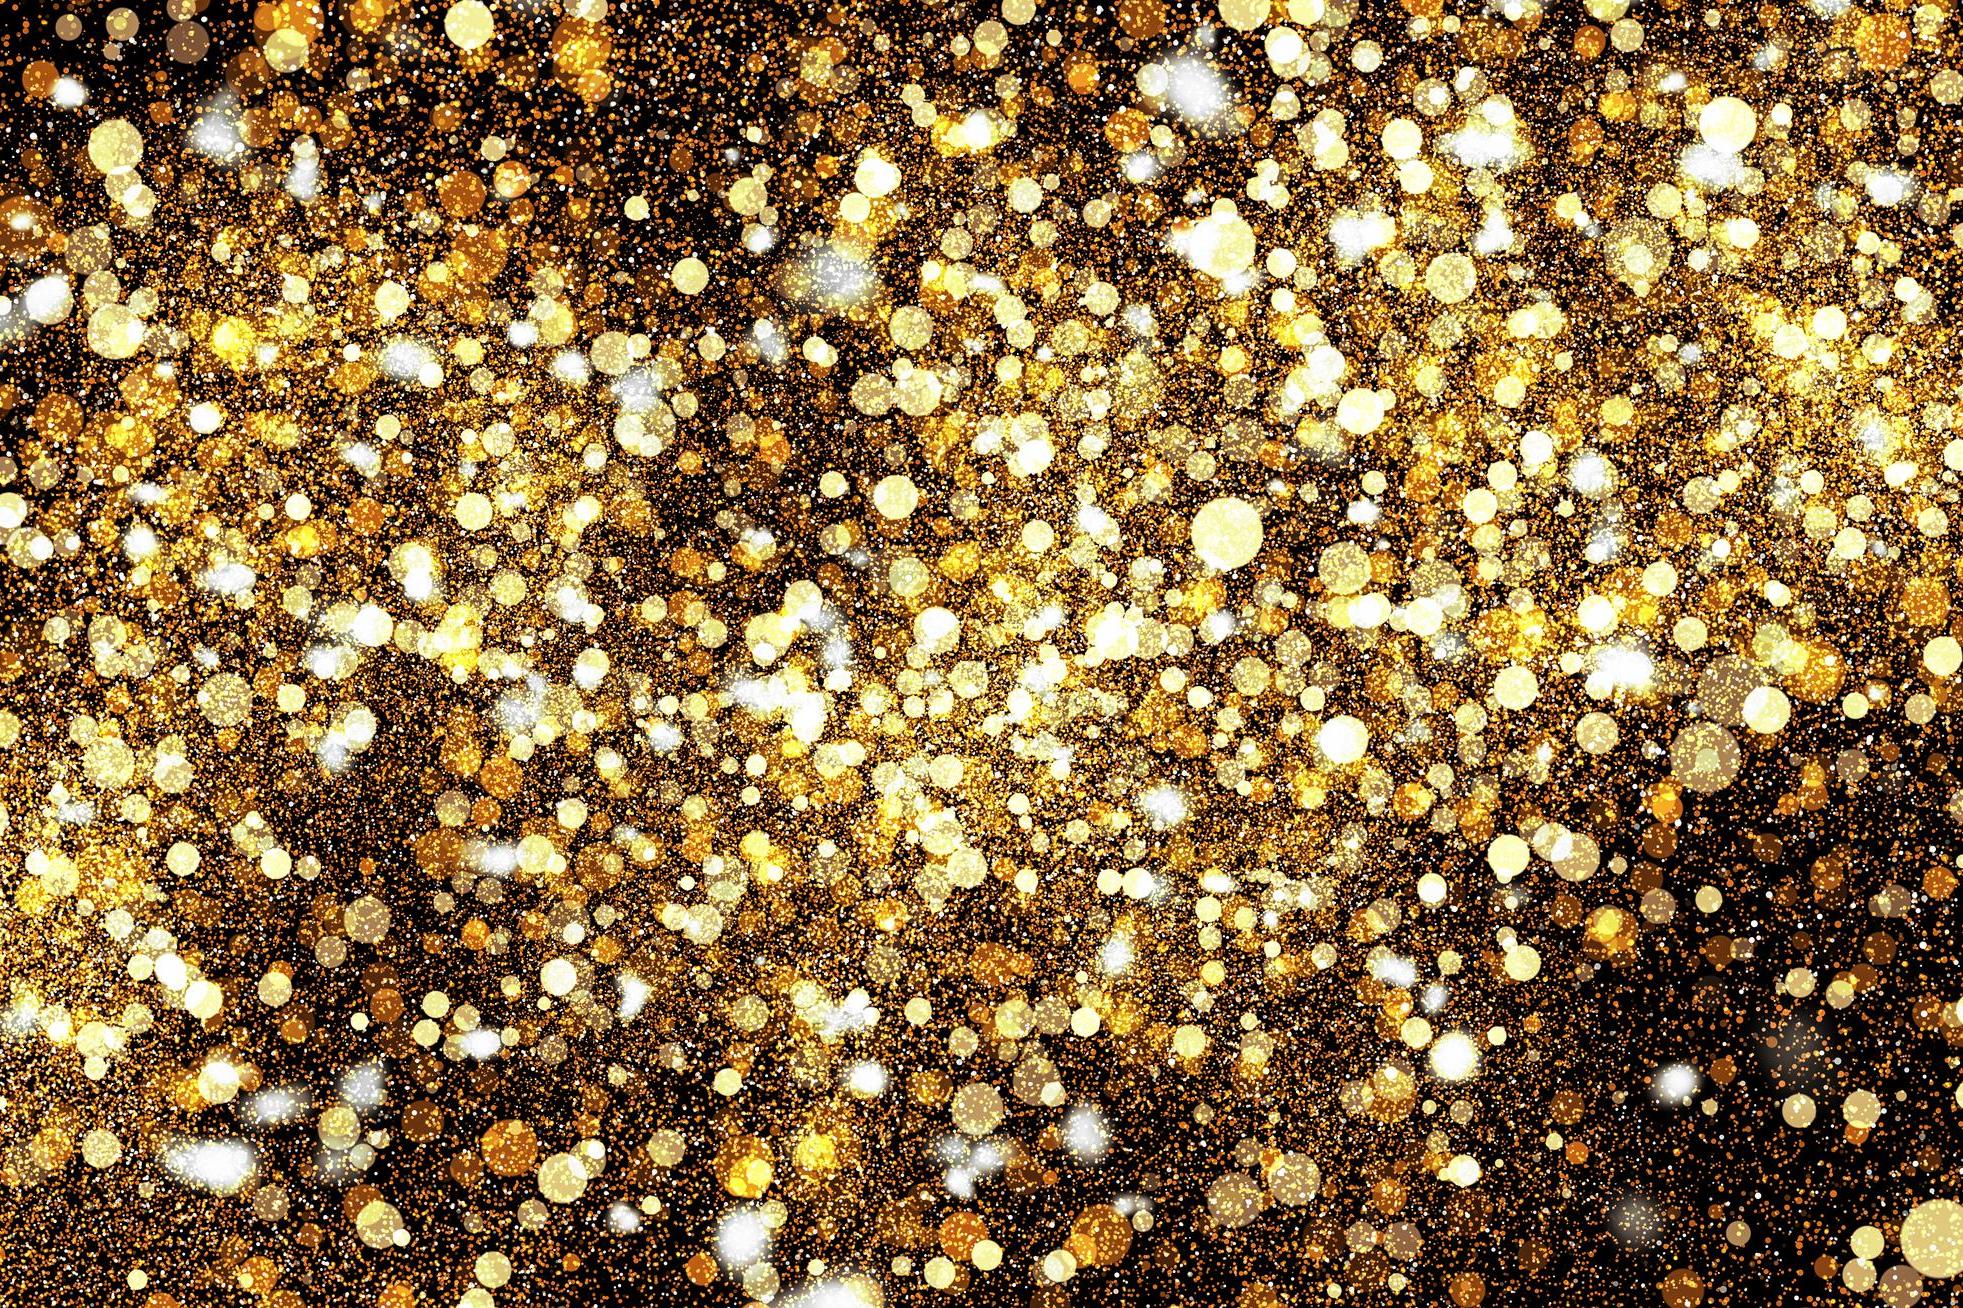 Ban glitter in the UK to save the environment, campaigners say